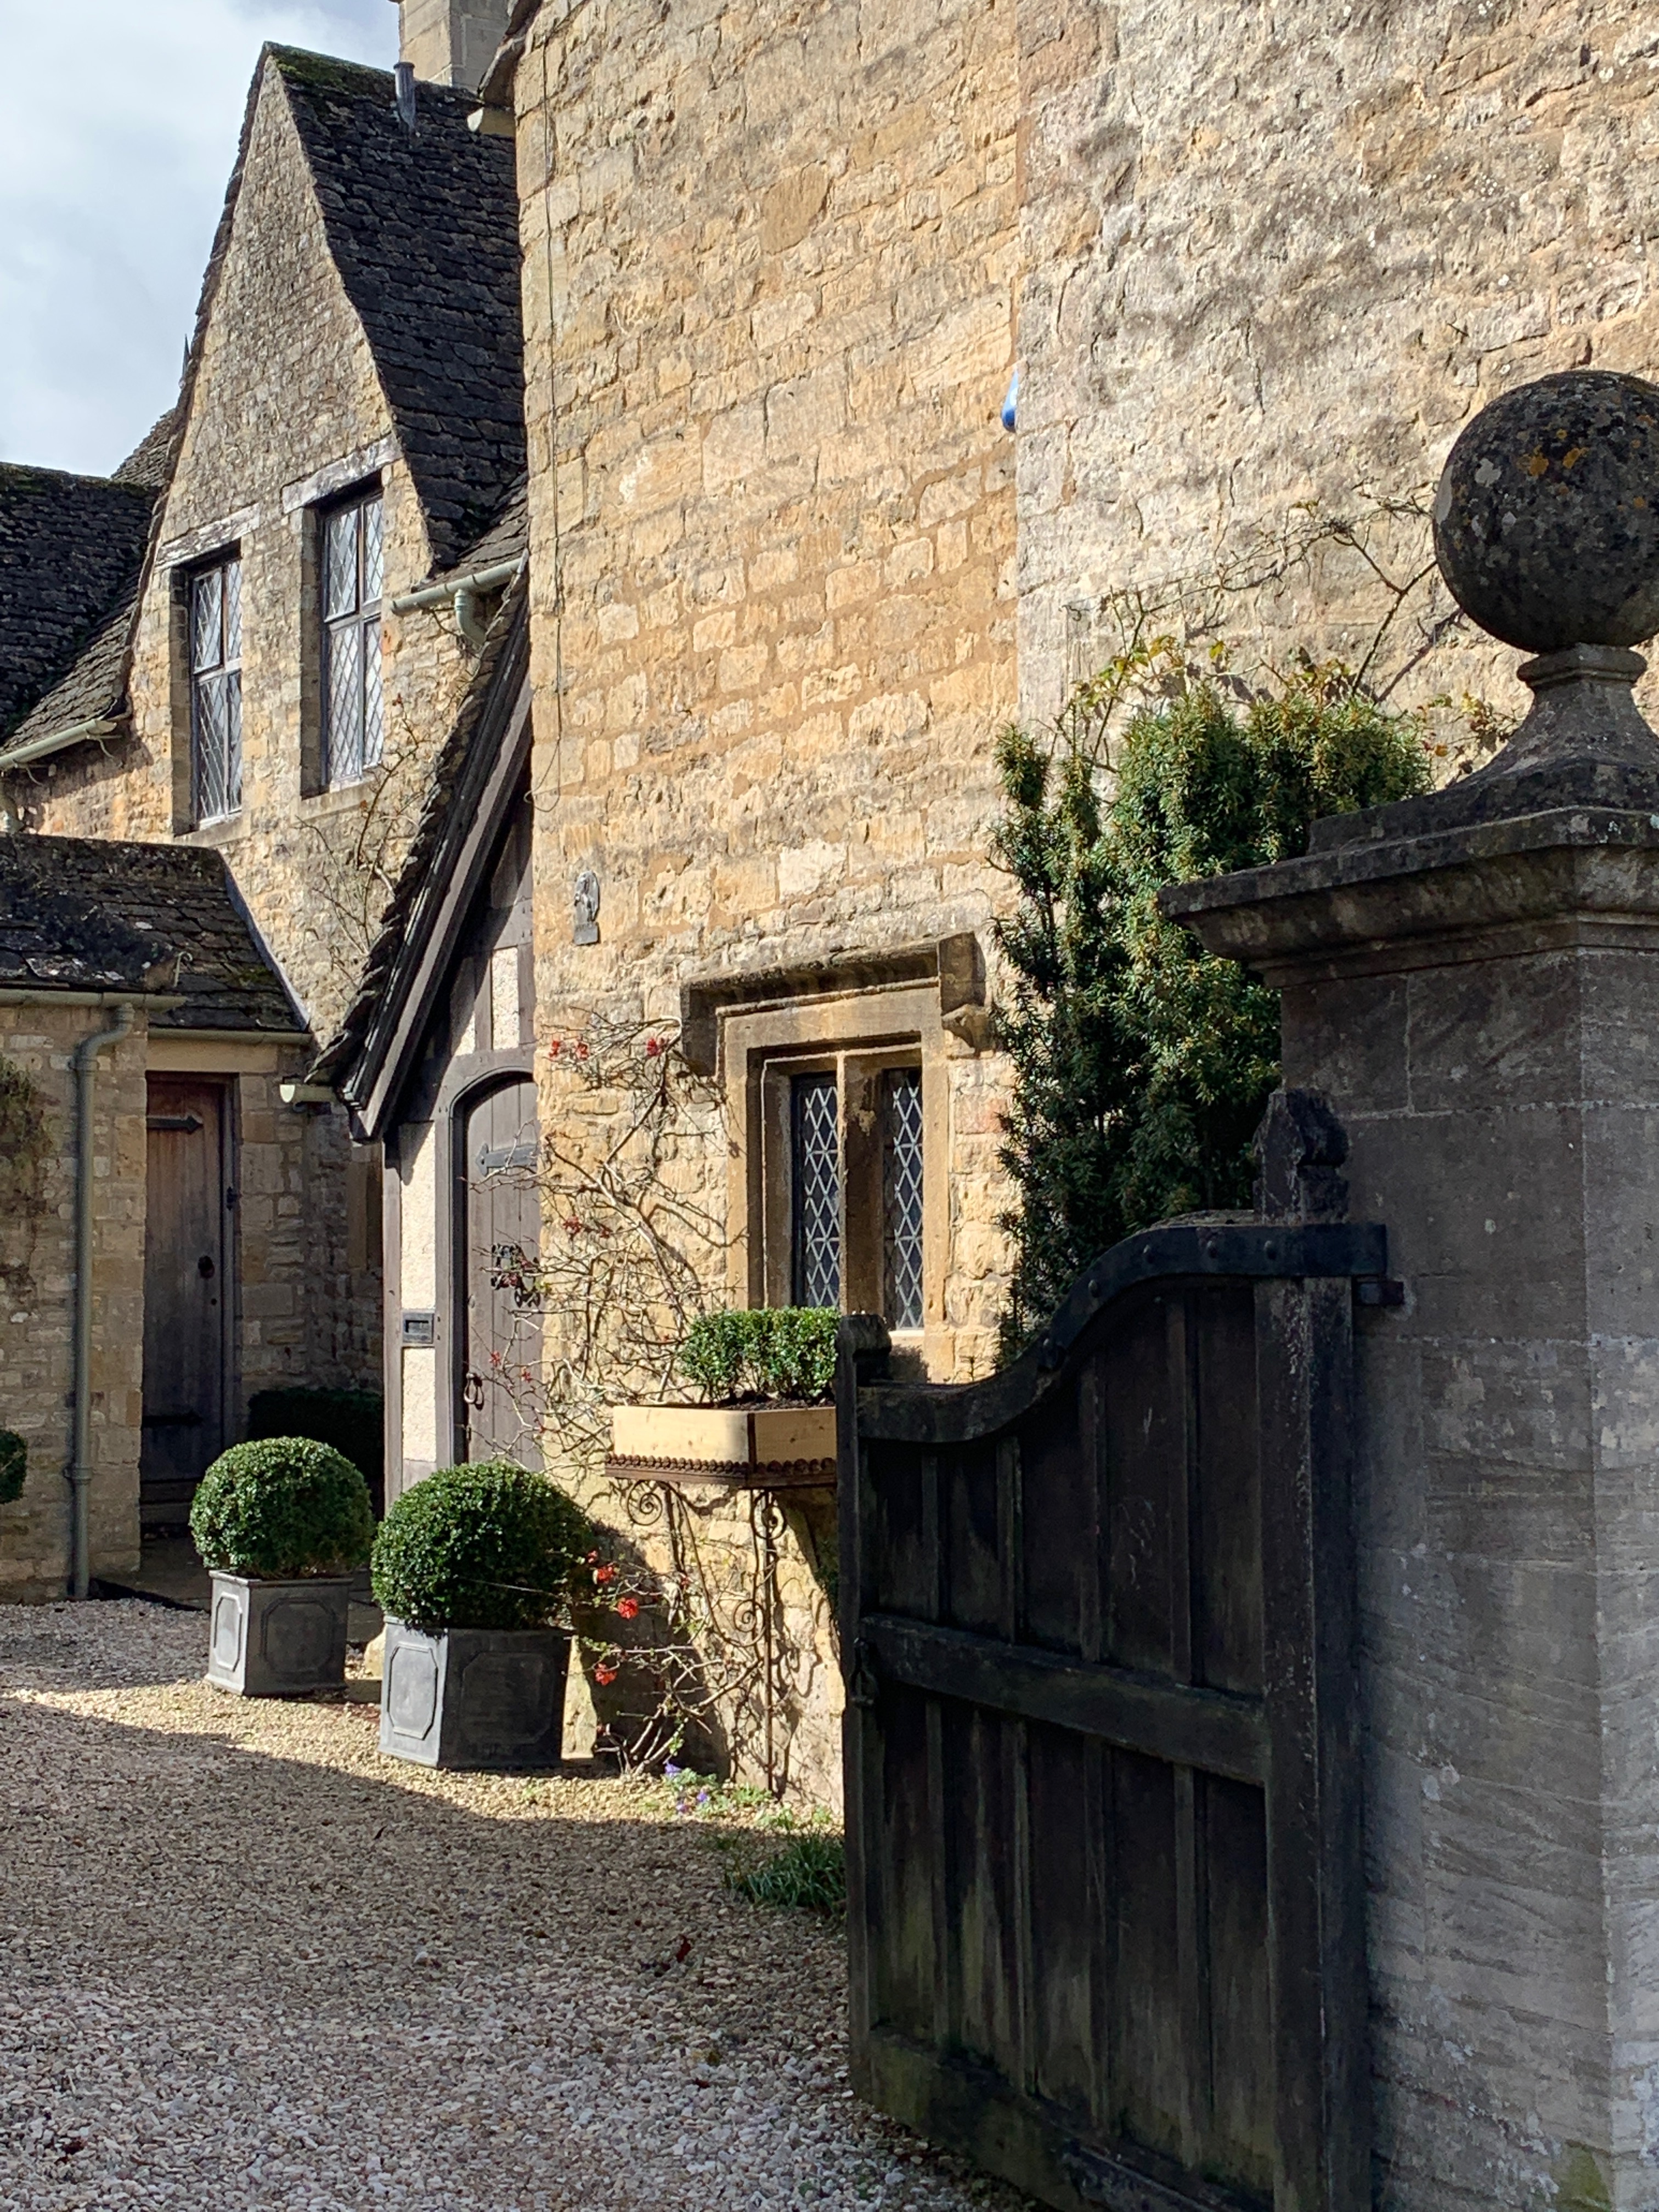 Cotswolds photo by Christina Dandar for The Potted Boxwood. 5